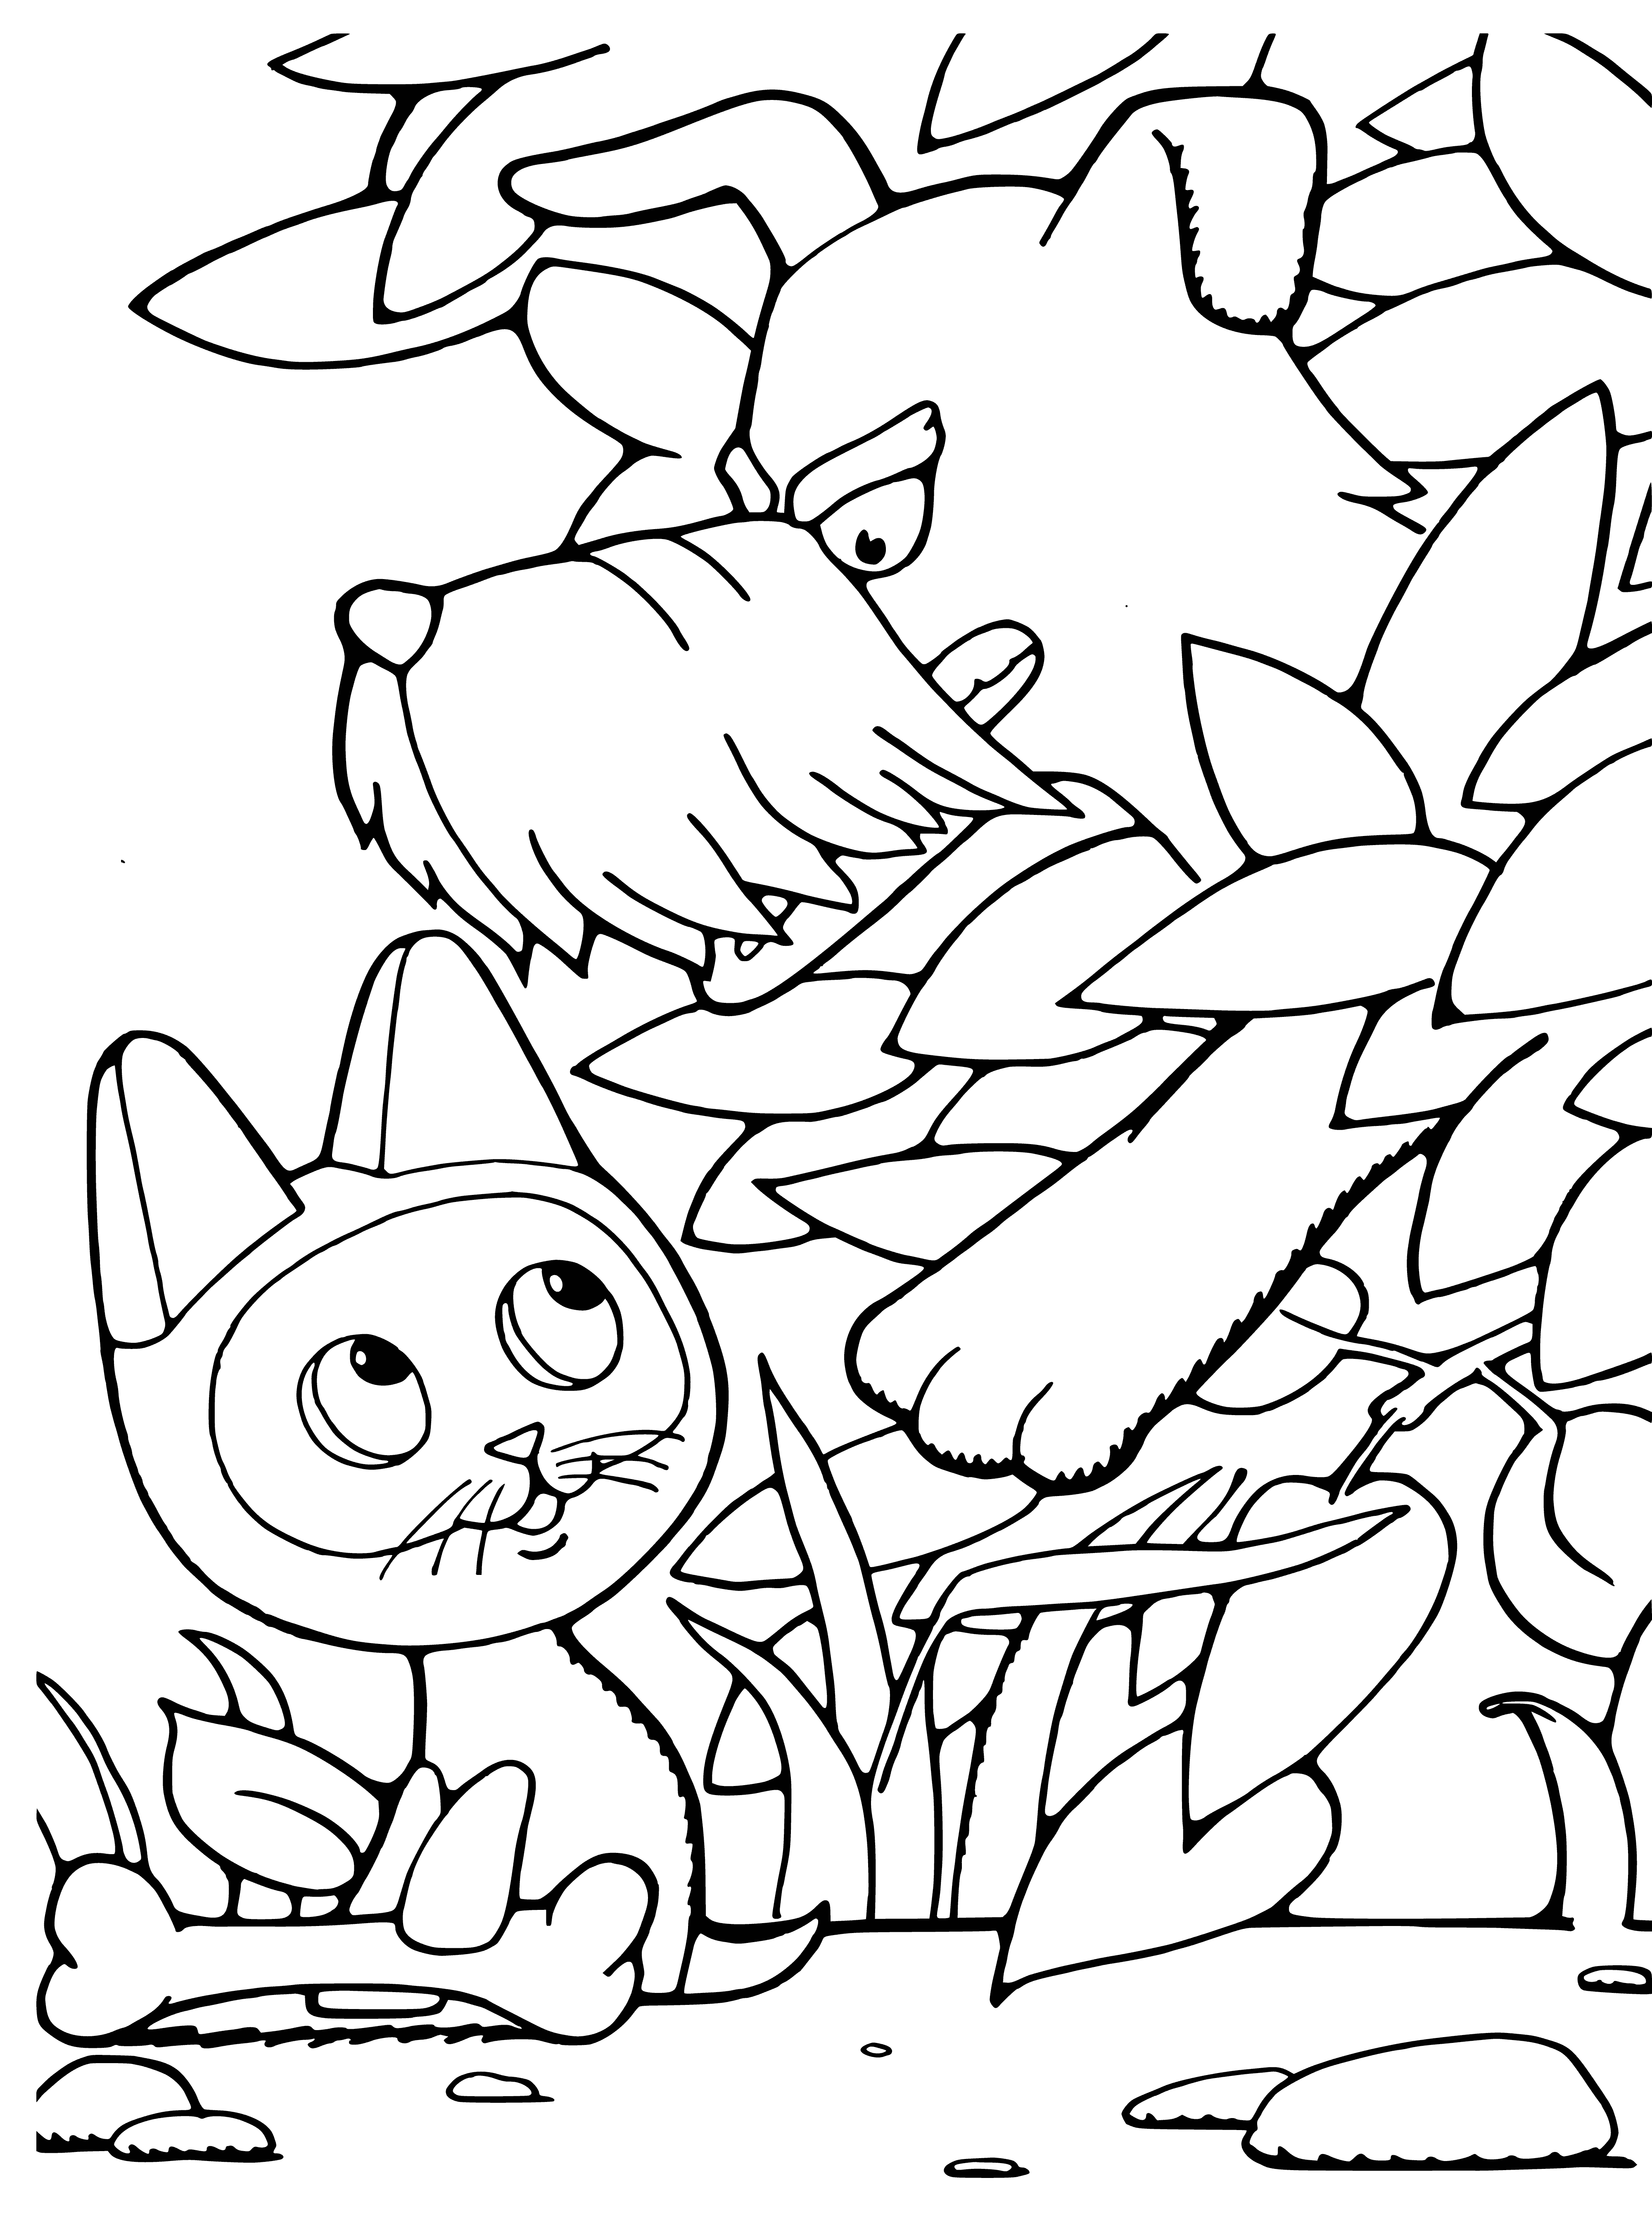 coloring page: Fluffy Kitten Woof loves to explore & play - with big blue eyes, a white muzzle & paws, & a black & white coat, she's always ready for adventure! #cute #kitten